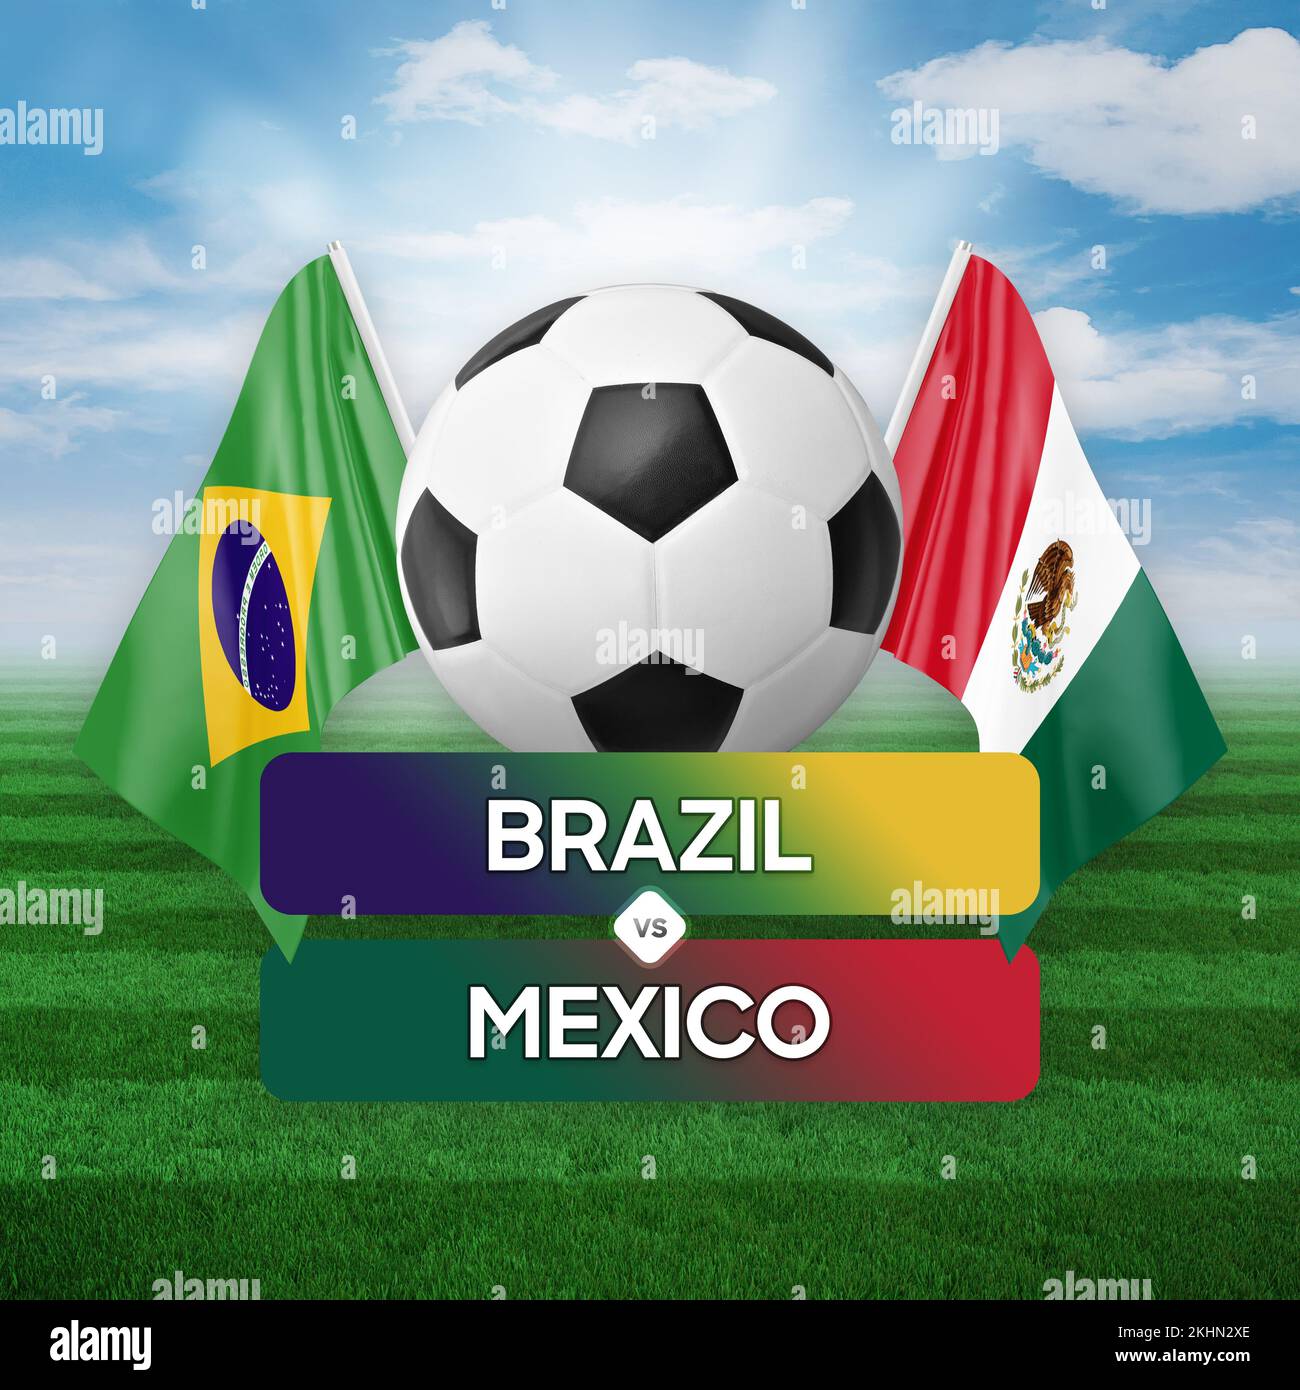 Brazil vs Mexico national teams soccer football match competition concept. Stock Photo